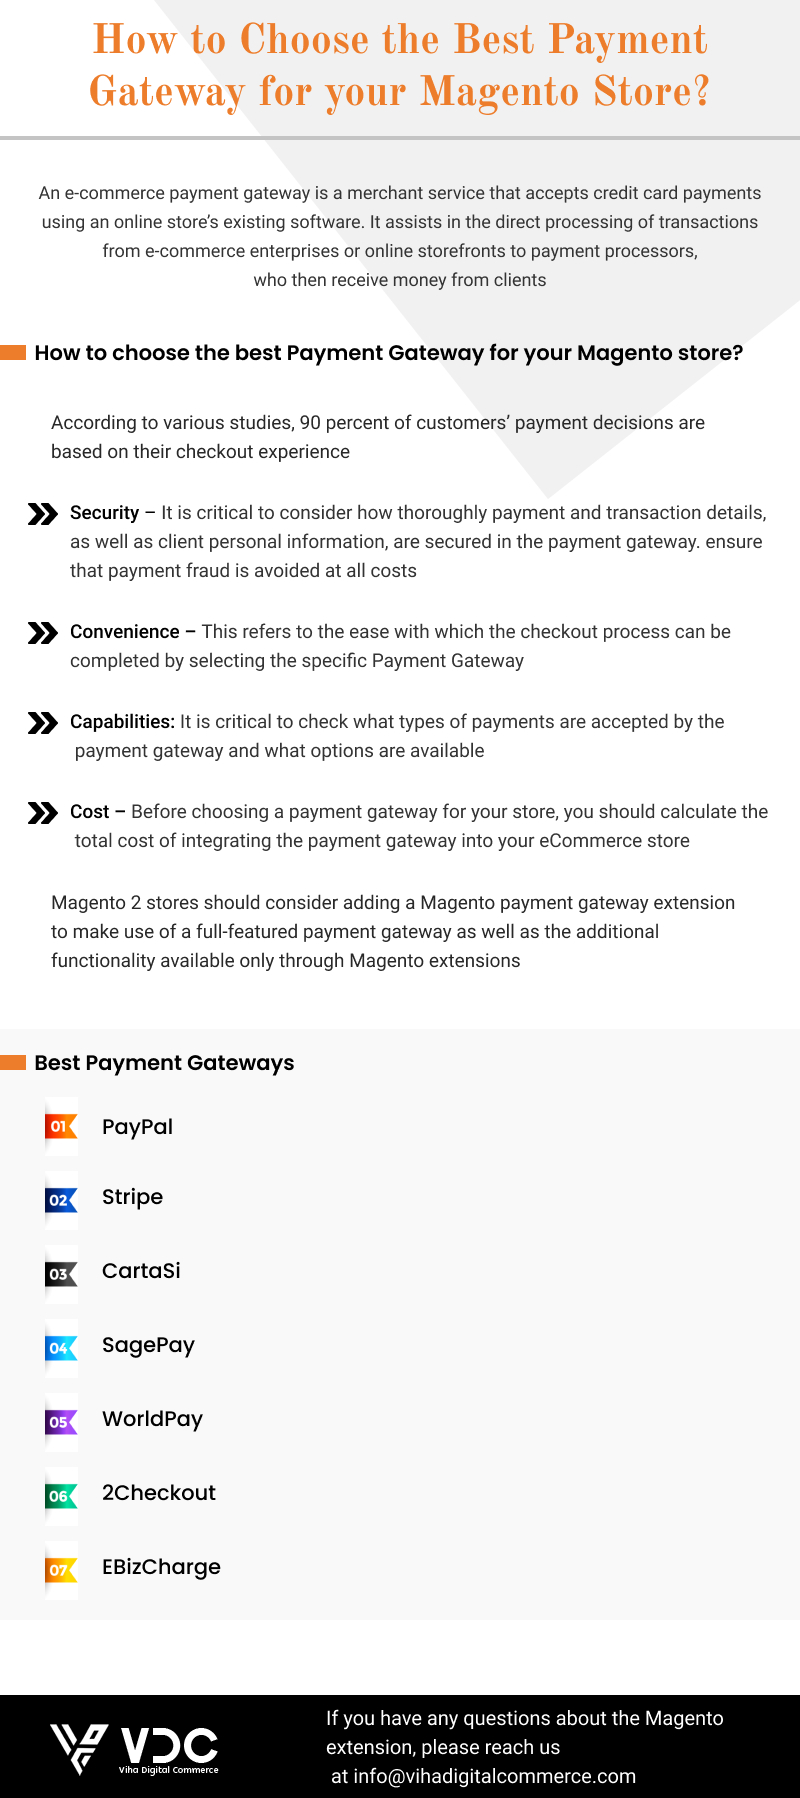 How to Choose the Best Payment Gateway for your Magento Store_